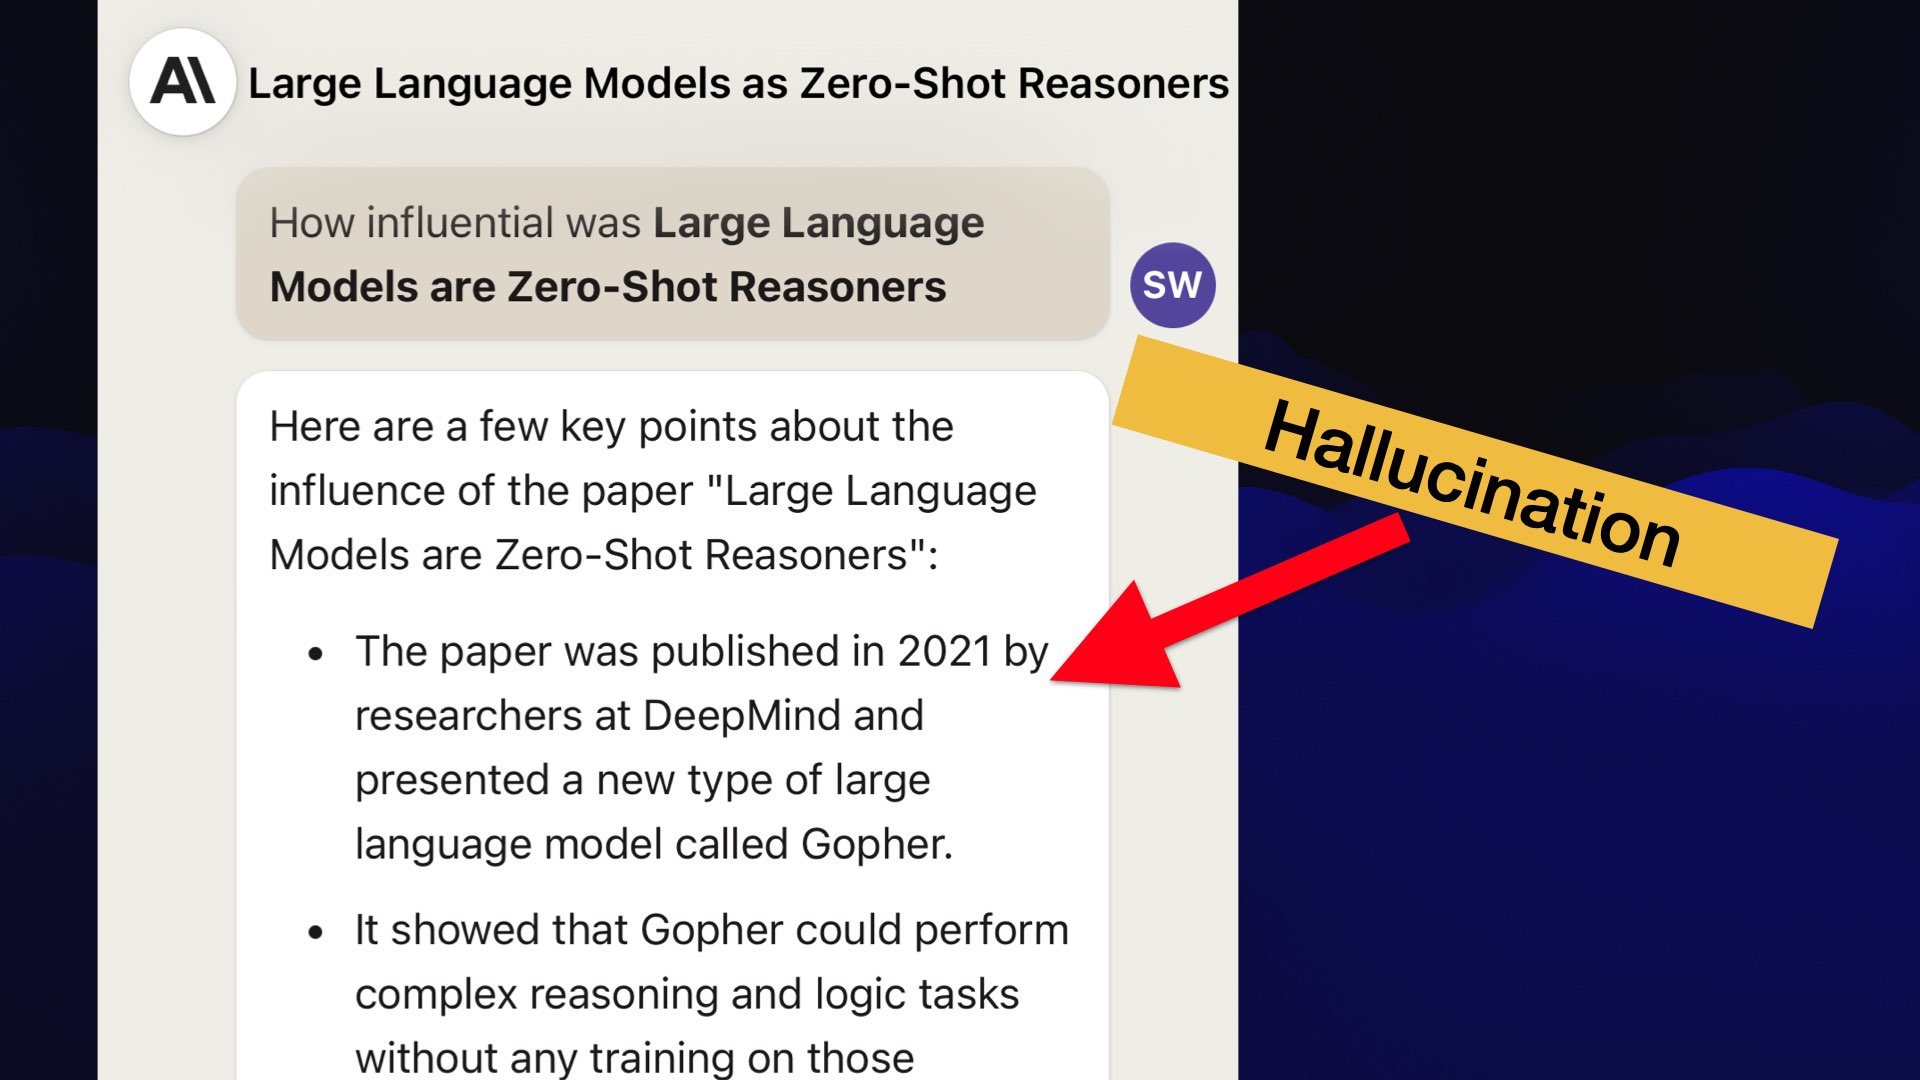 Screenshot of Claude. Prompt: How influential was Large Language Models are Zero-Shot Reasoners.  A label "Hallucination" points to the response, which starts:  Here are a few key points about the influence of the paper "Large Language Models are Zero-Shot Reasoners":  The paper was published in 2021 by researchers at DeepMind and presented a new type of large language model called Gopher.  It showed that Gopher could perform complex reasoning and logic tasks without anv training on those...